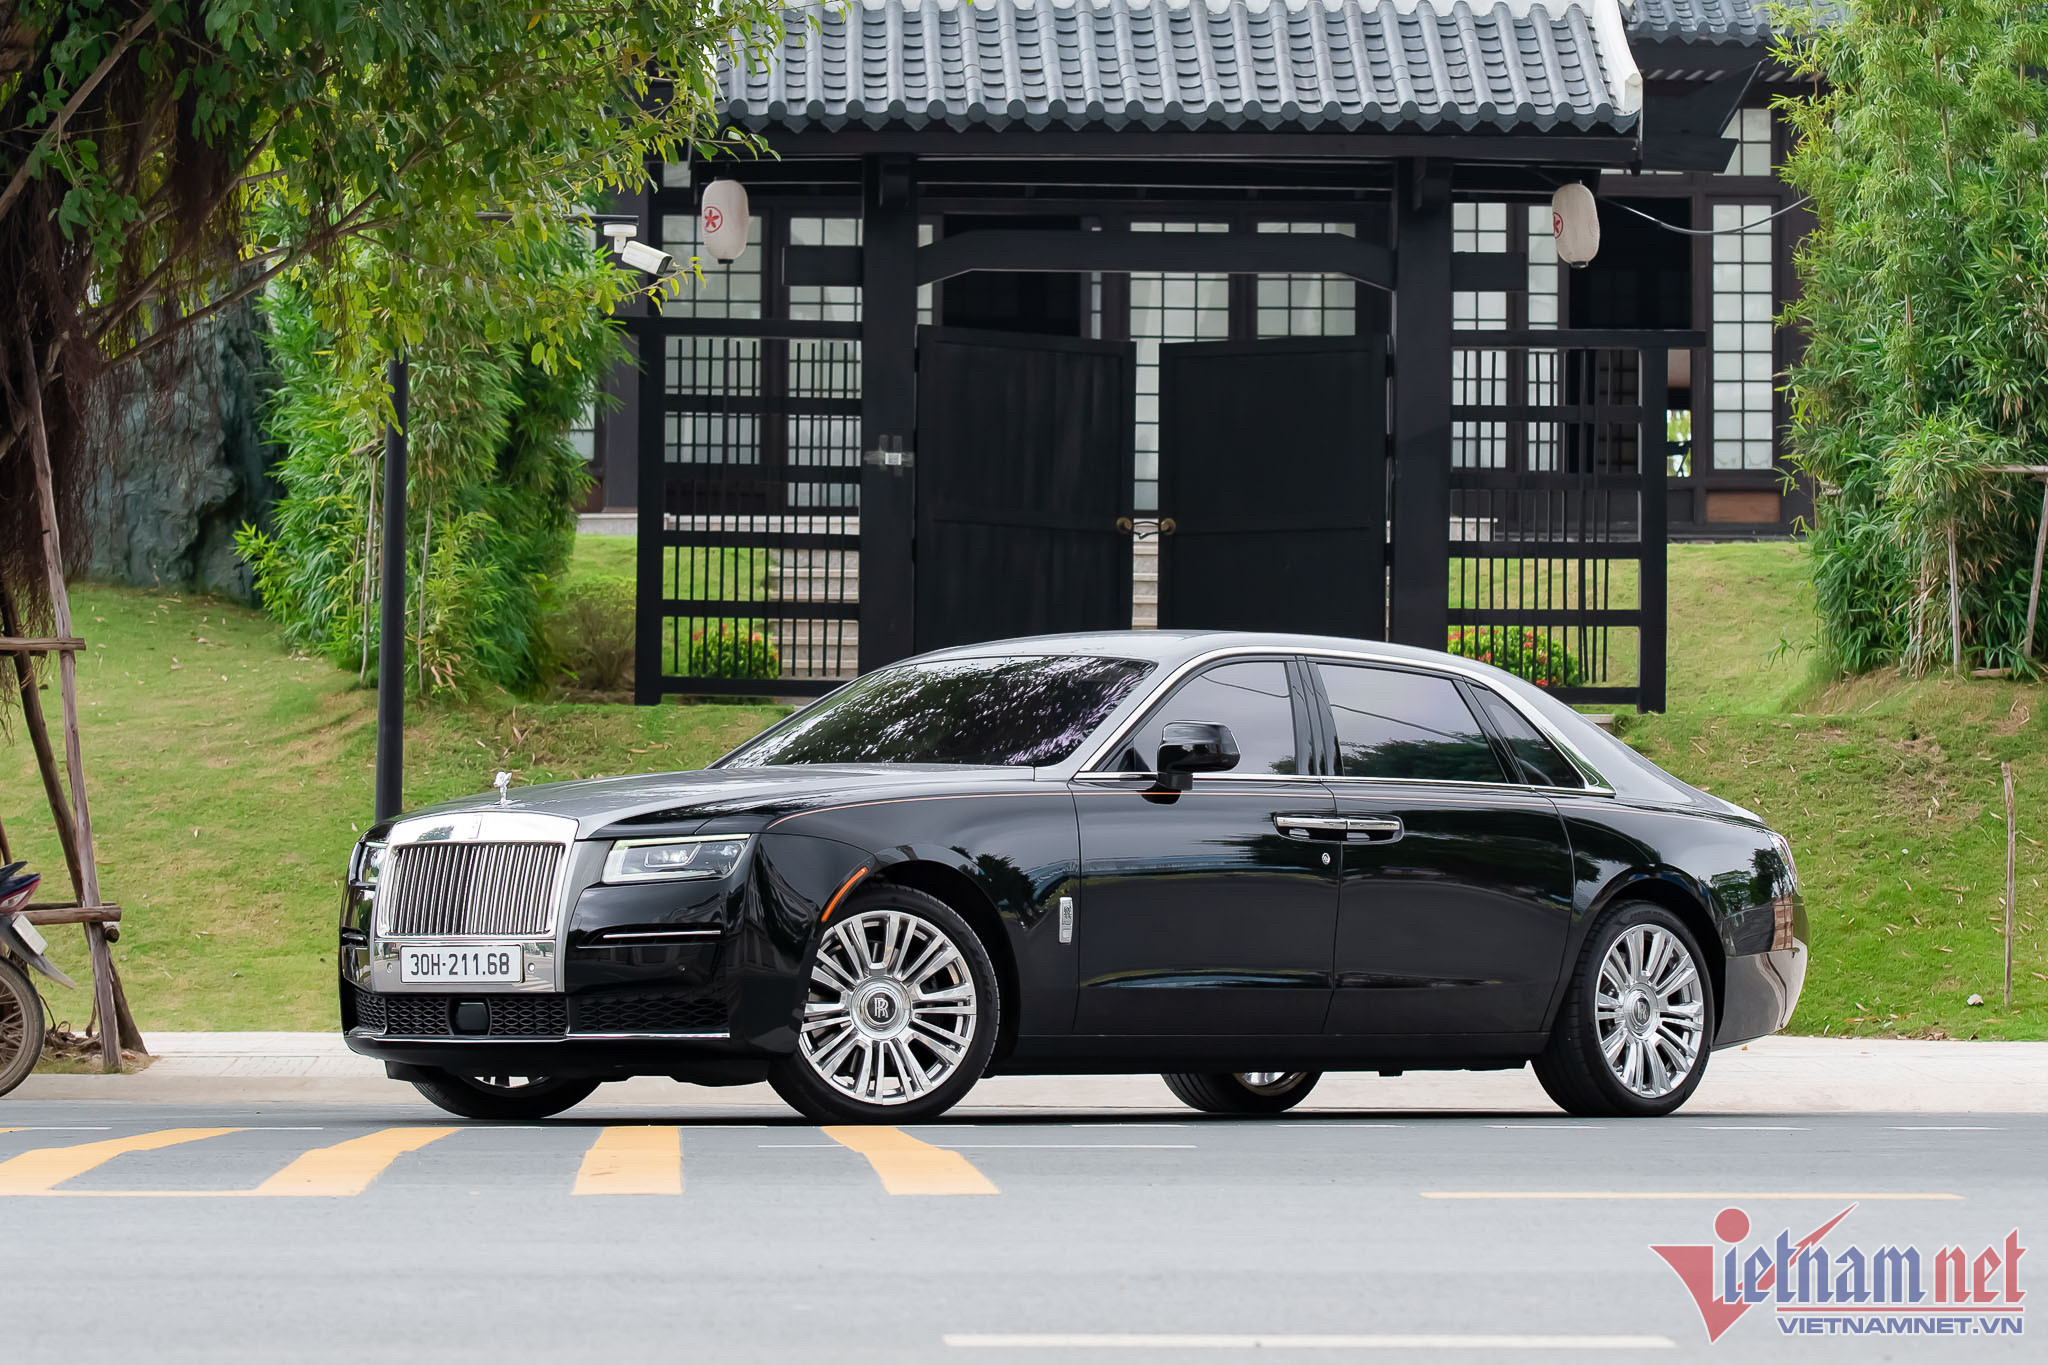 New RollsRoyce Models now available at VINCAR